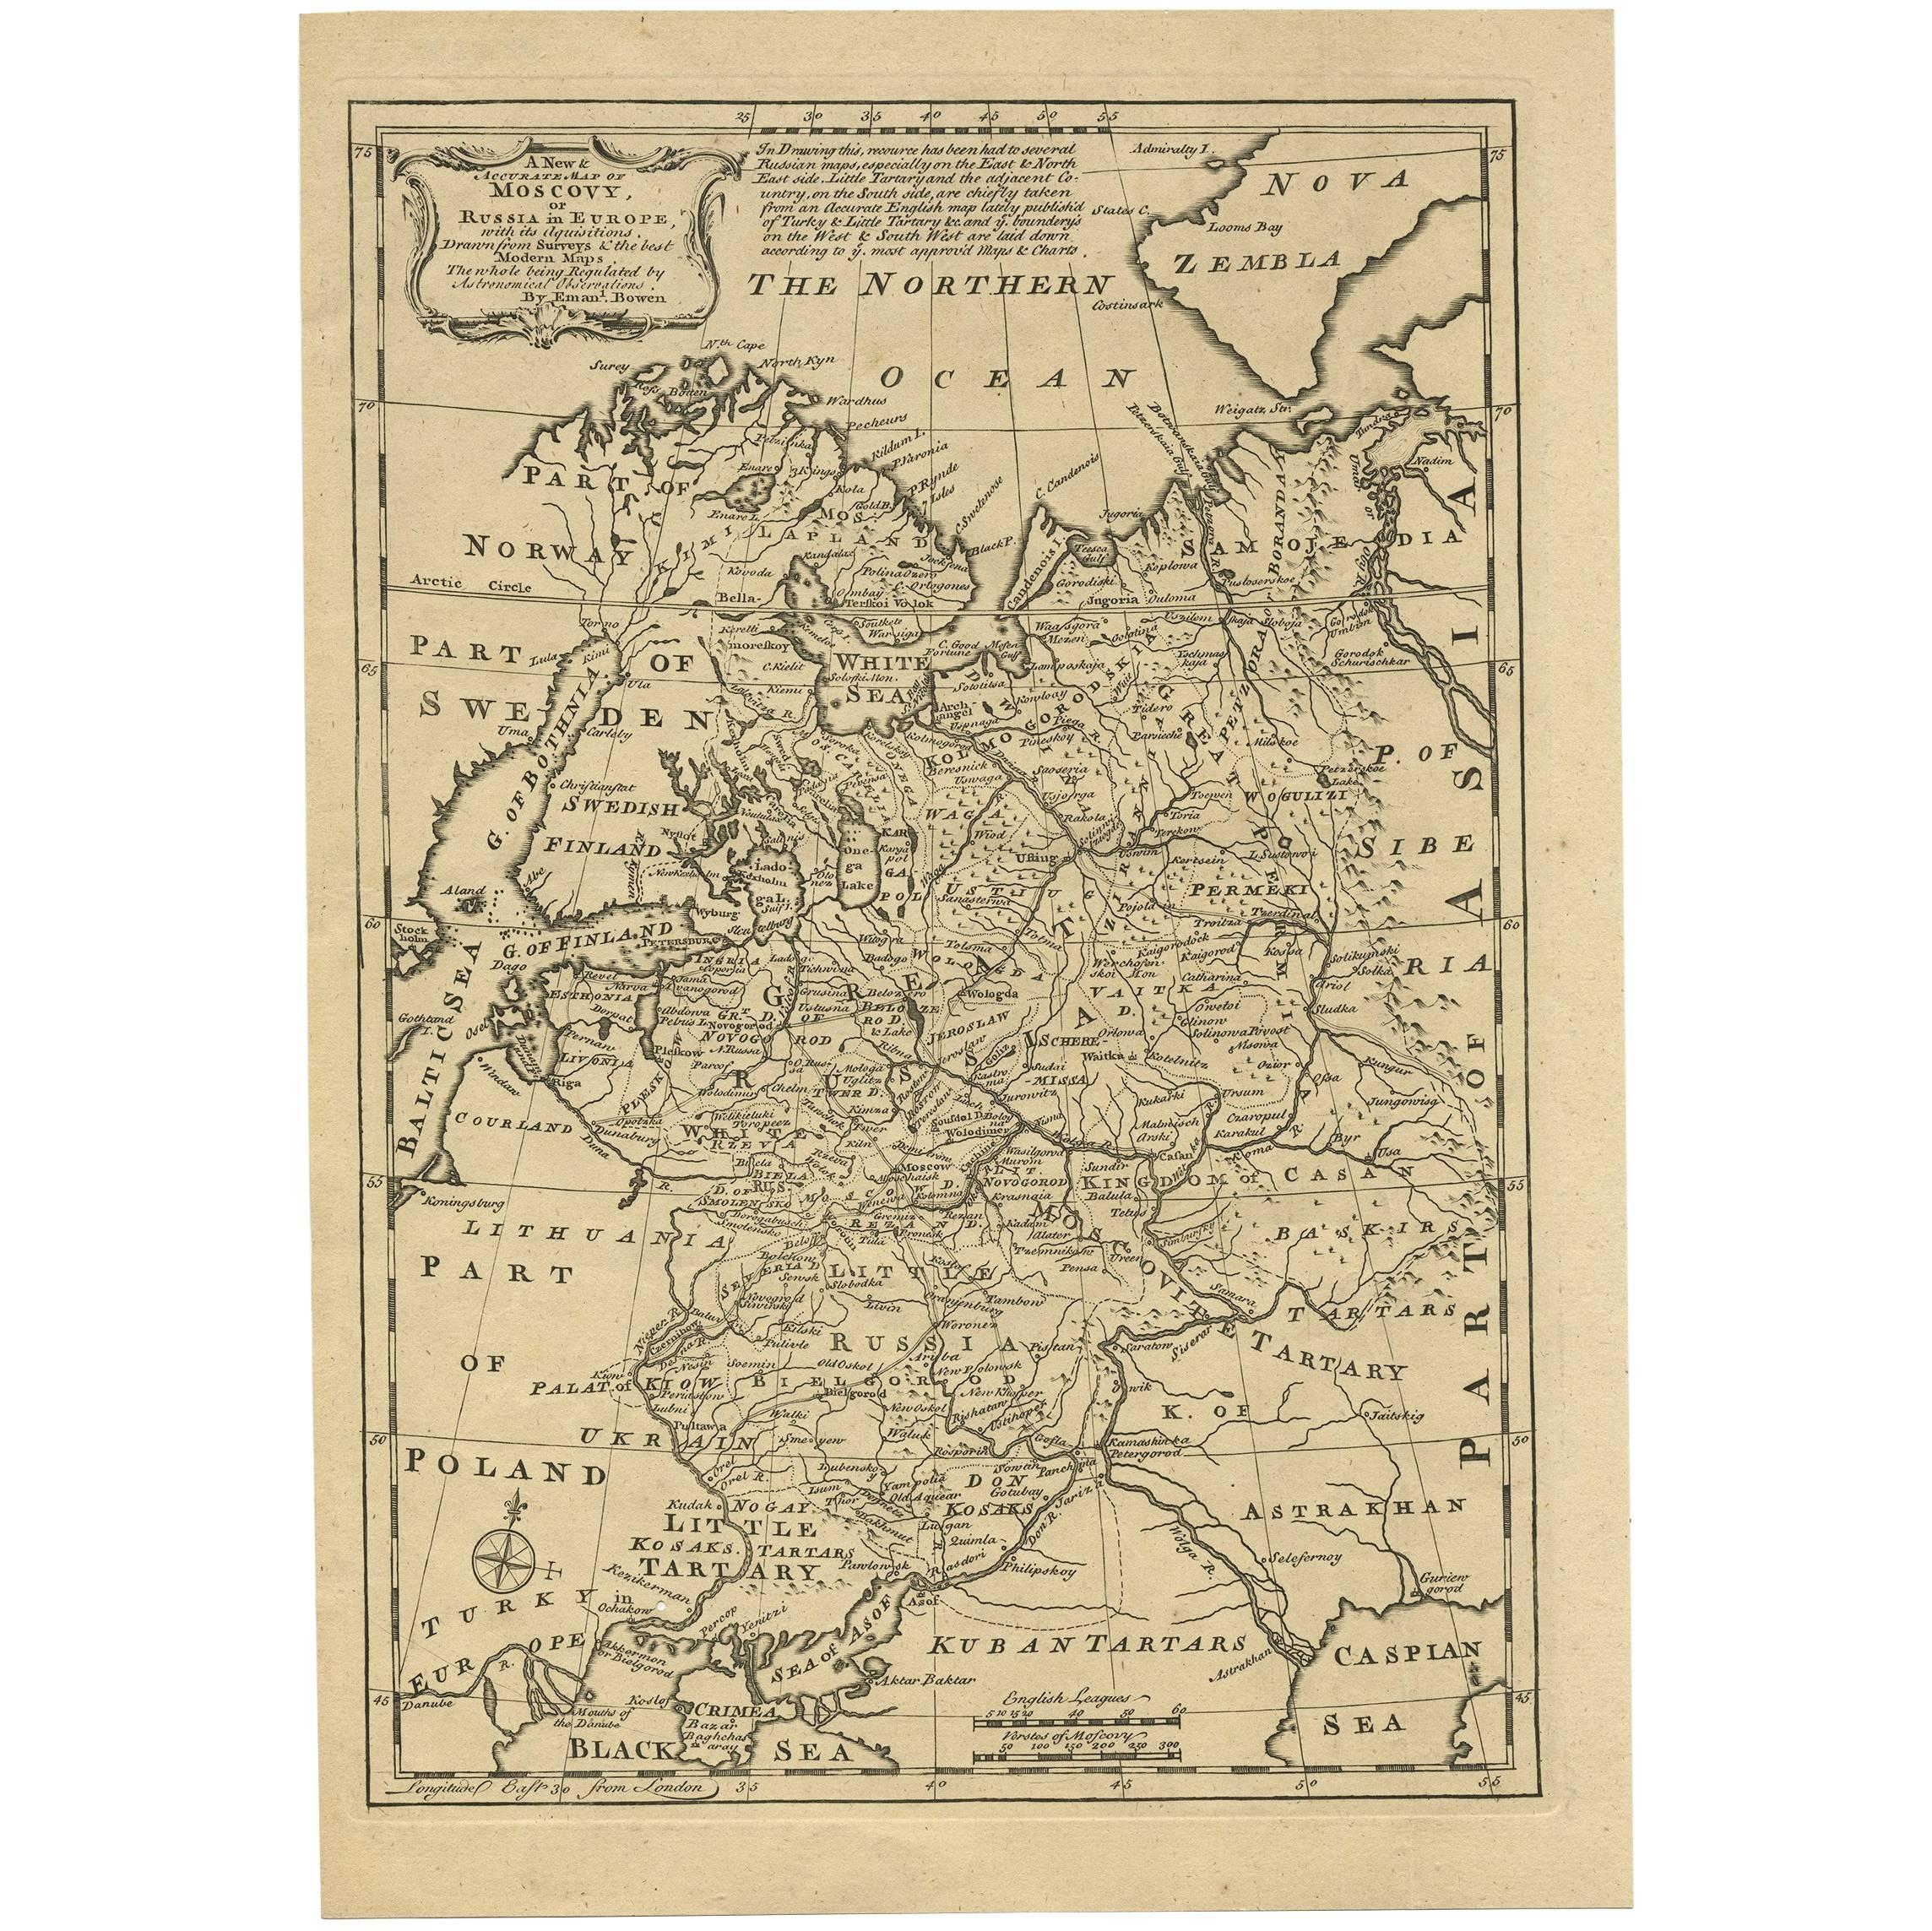 Antique Map of Moscovy 'Russia' by E. Bowen, 1747